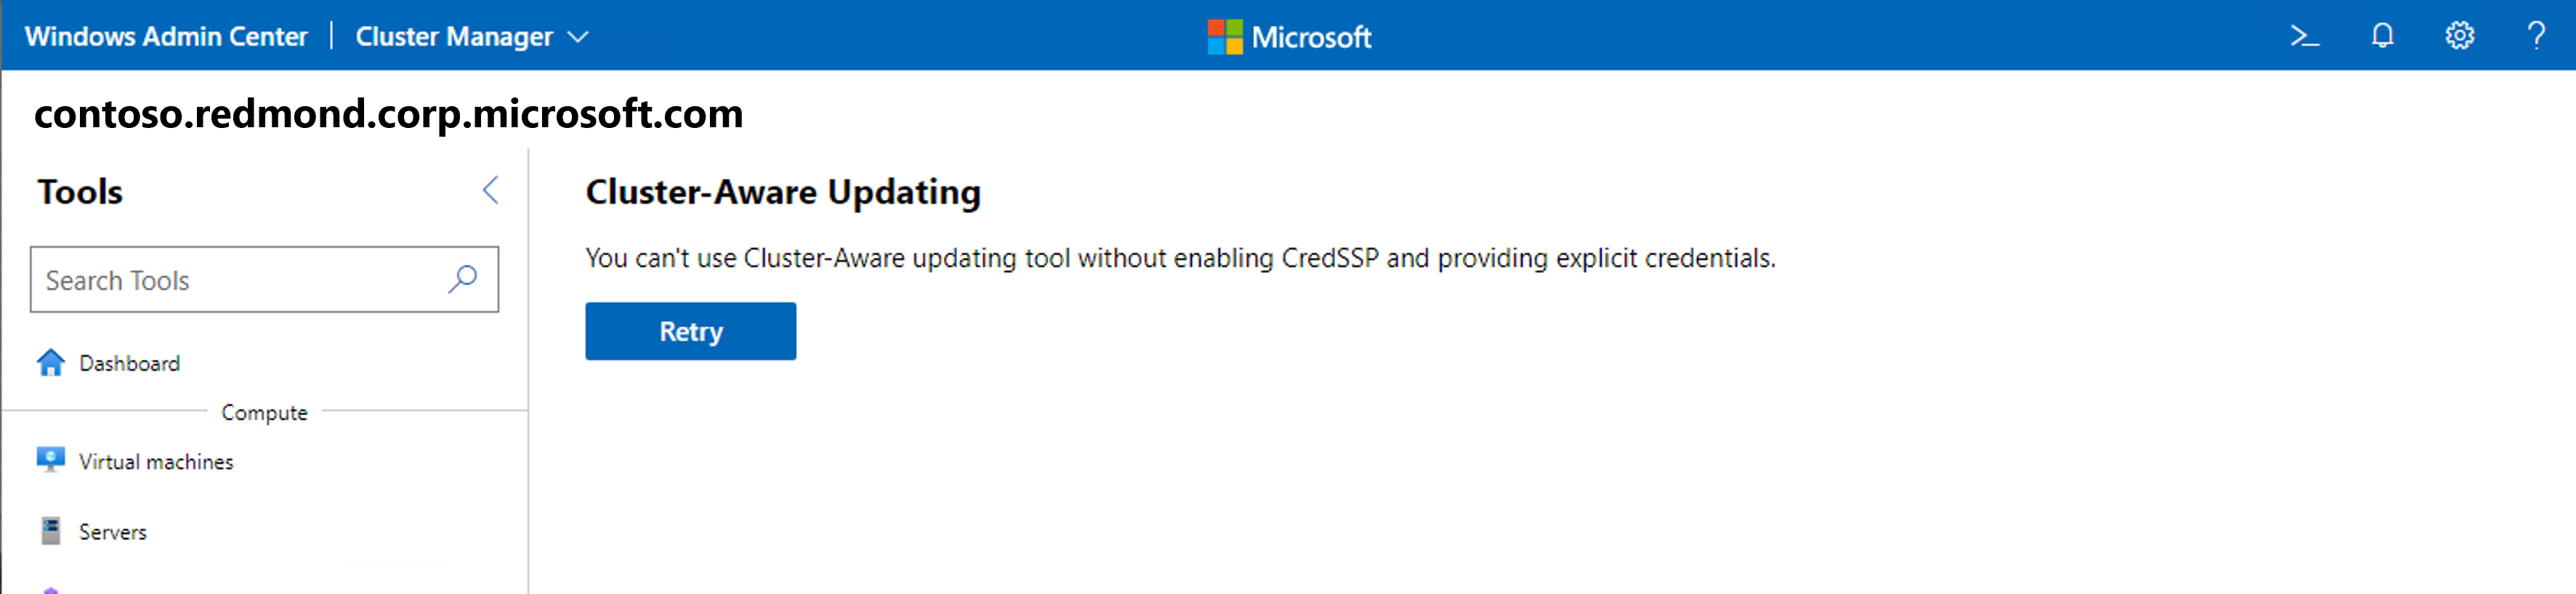 Screenshot of Updates tool using Cluster-Aware Updating with Cred S S P error.